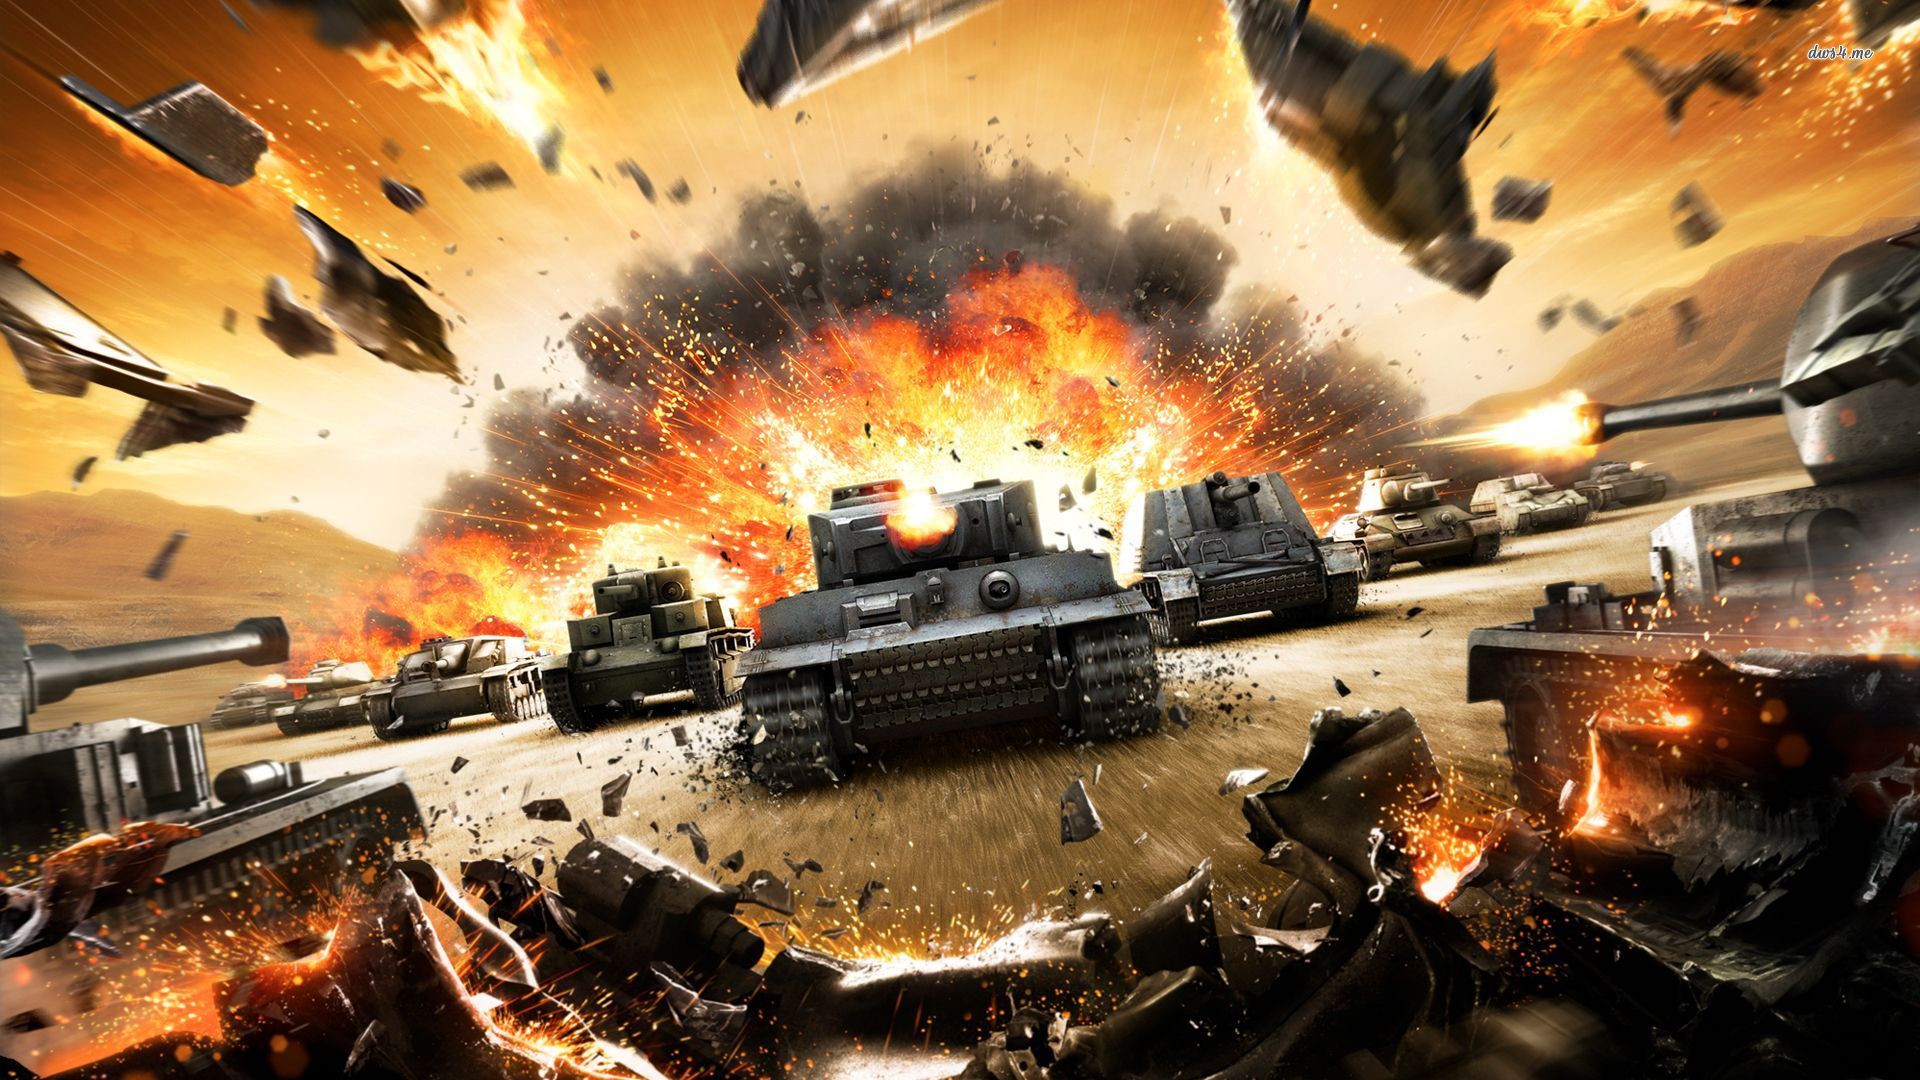 This World of Tanks trailer explodes everything to celebrate 100 million players | VG247